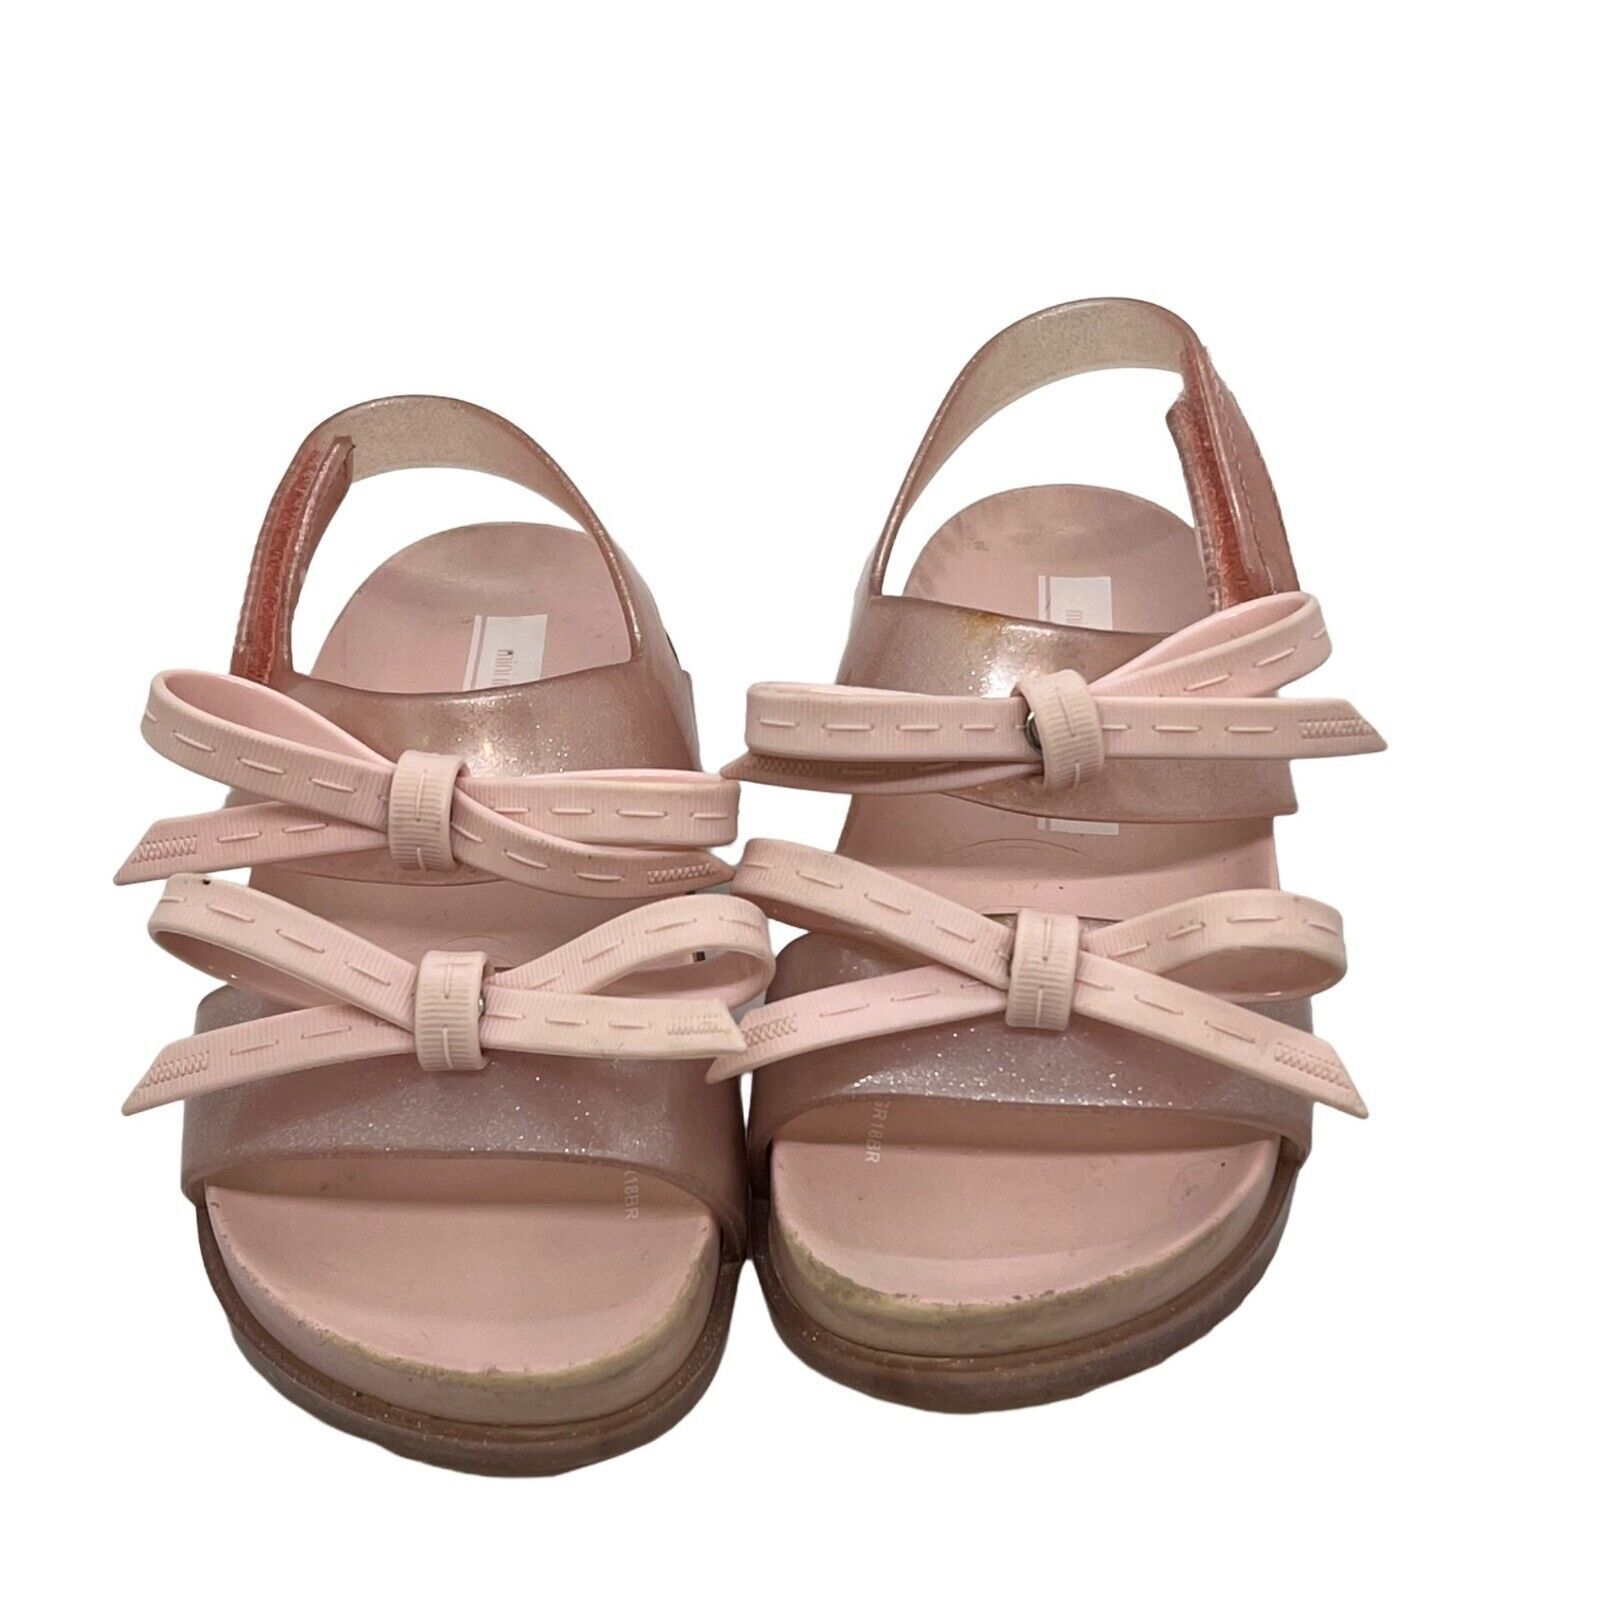 Primary image for Mini Melissa Sz 9 Little Girls Pink Rubber Sandals